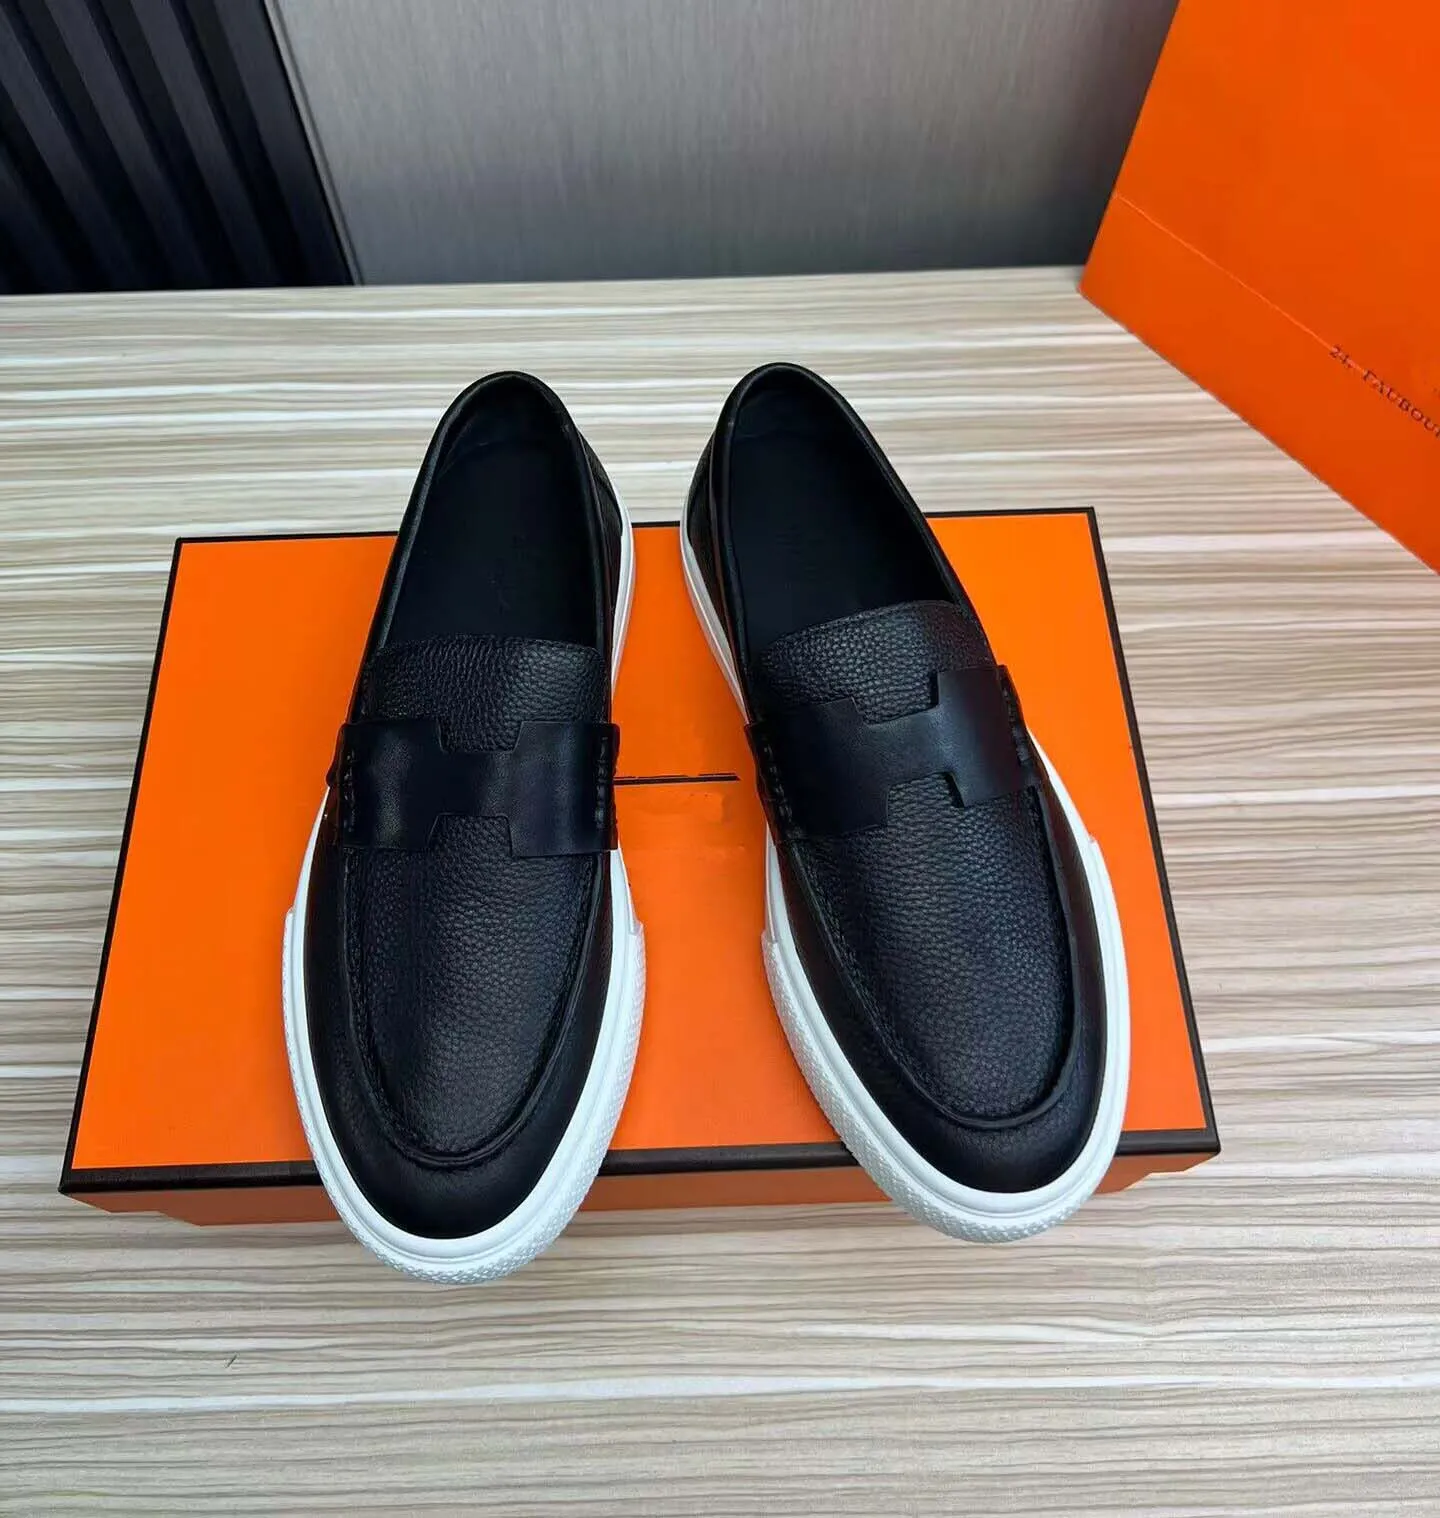 Super Quality Men business loafer leather dress flats Ike slip-on sneaker grain genuine leather slip on platform casual shoes sports sneaker top gift with box